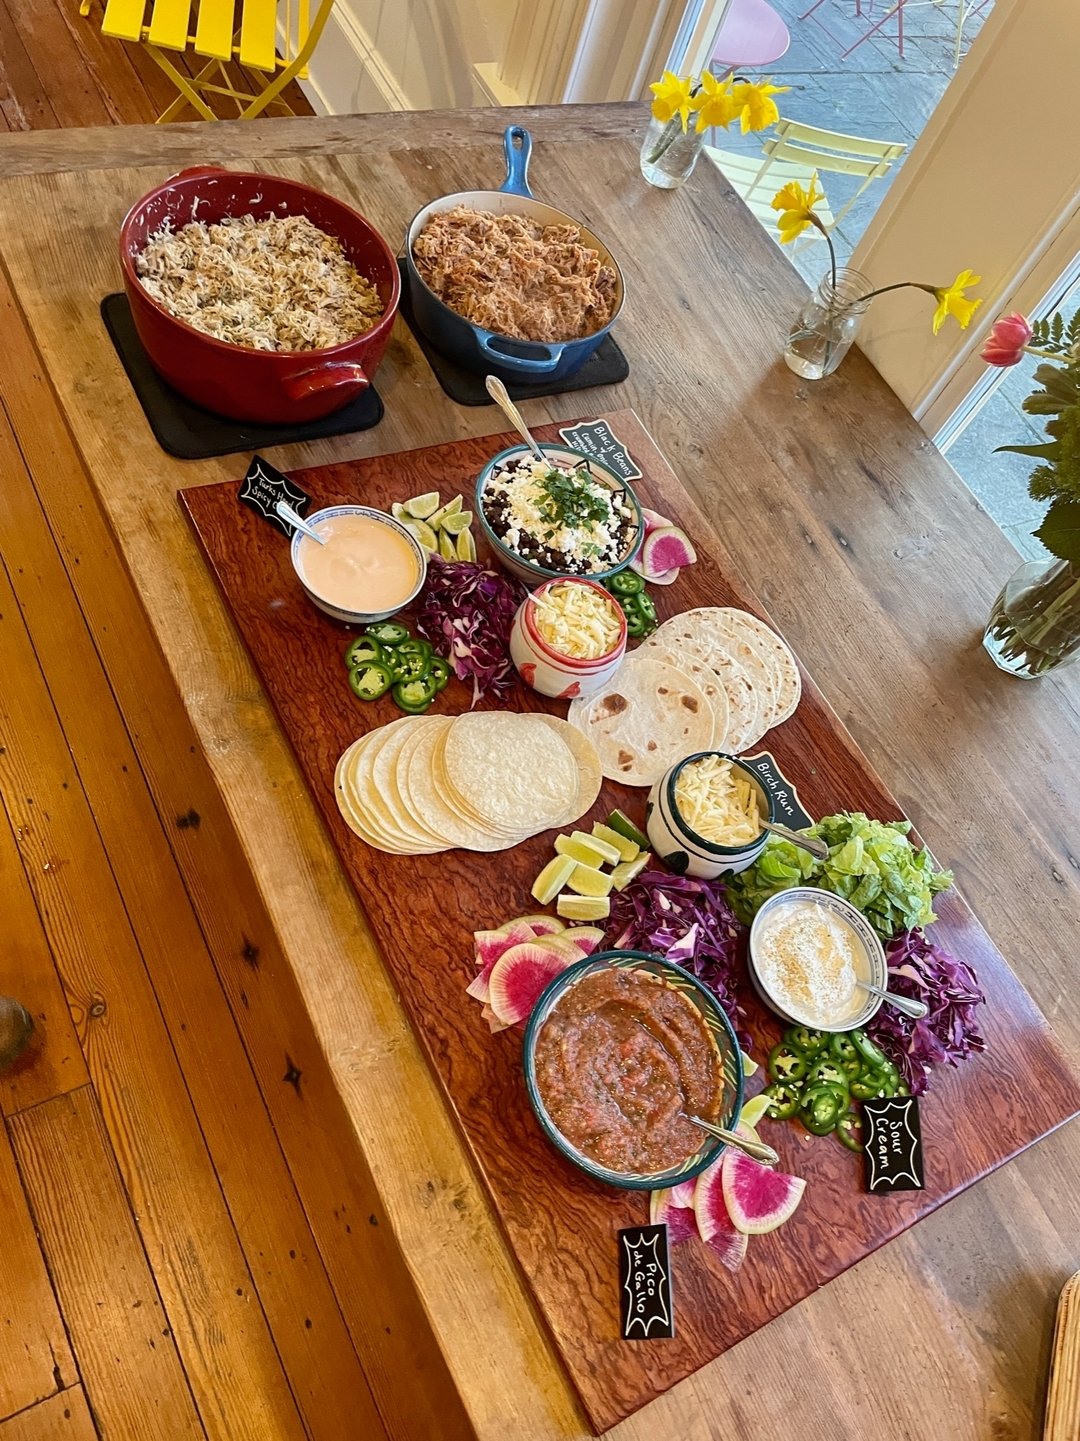 Did you know you can ask for a &ldquo;build your own taco bar&rdquo; if you host a private event with us?